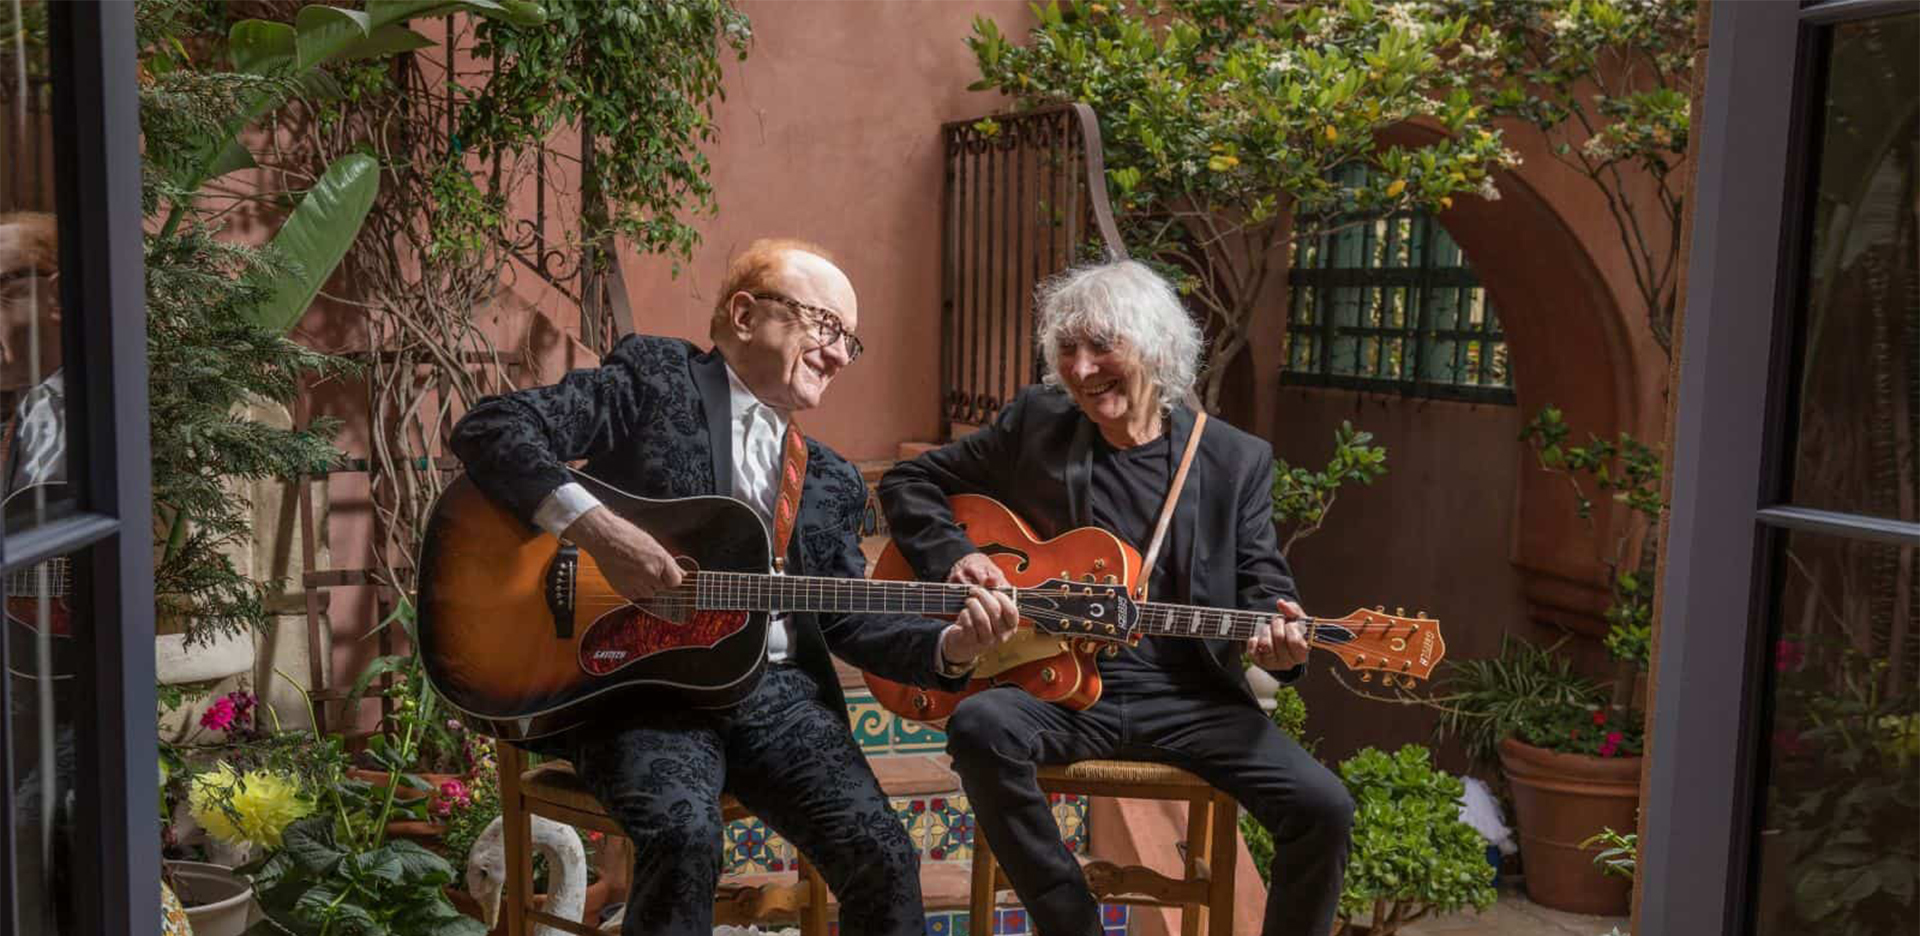 Peter Asher and Albert Lee